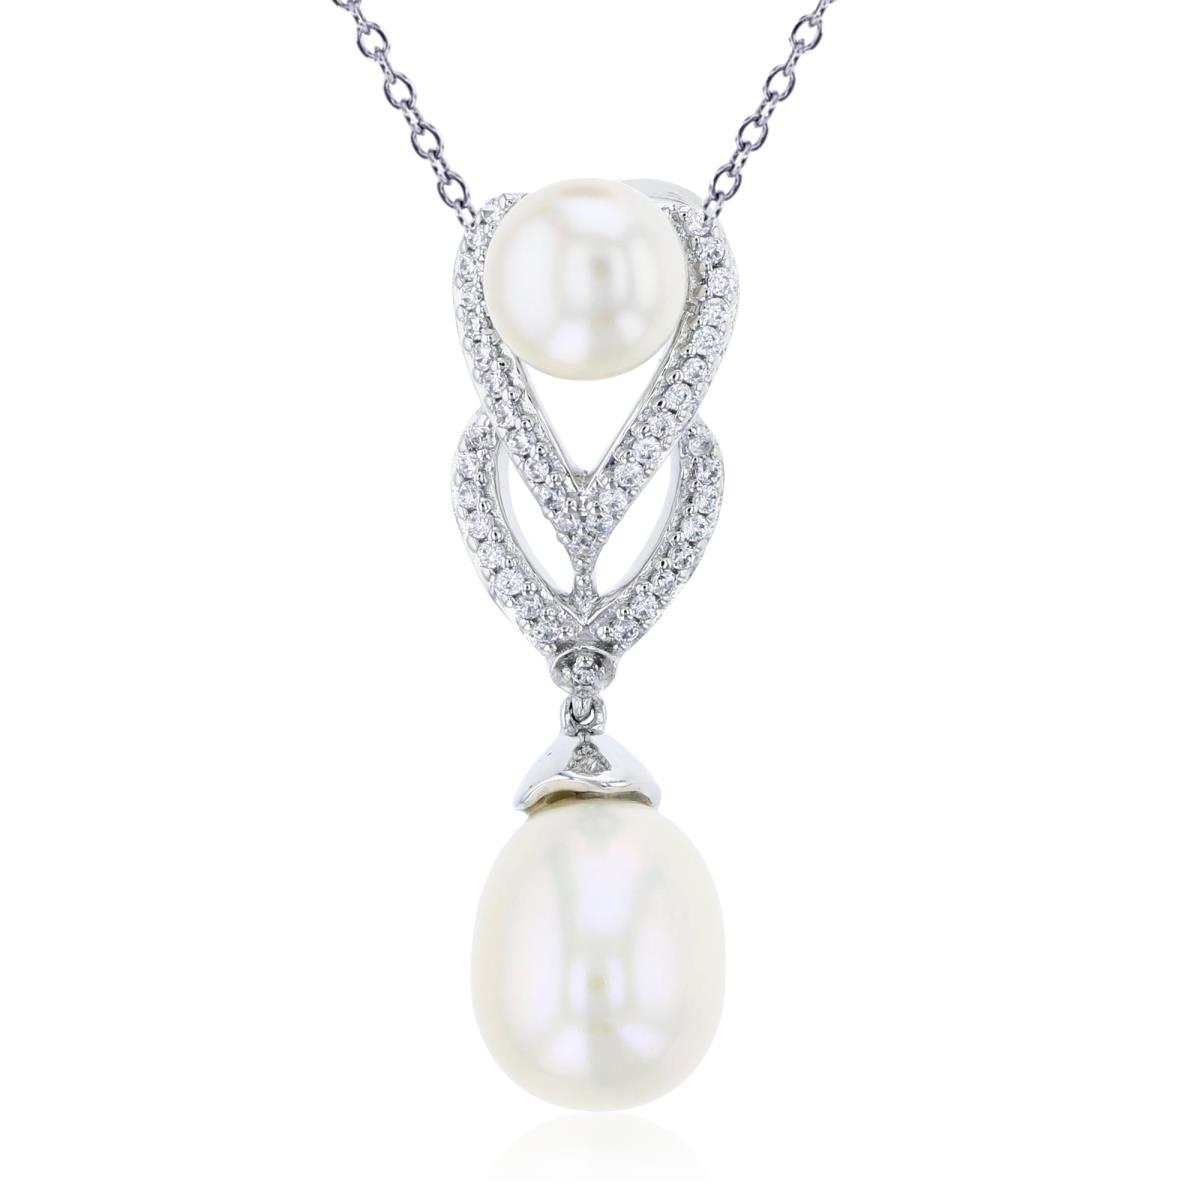 10K Gold White 0.08 CTTW Rnd Diam & 11X9-mm TD/ 7mm Button White Pearl Dangling 18"Necklace